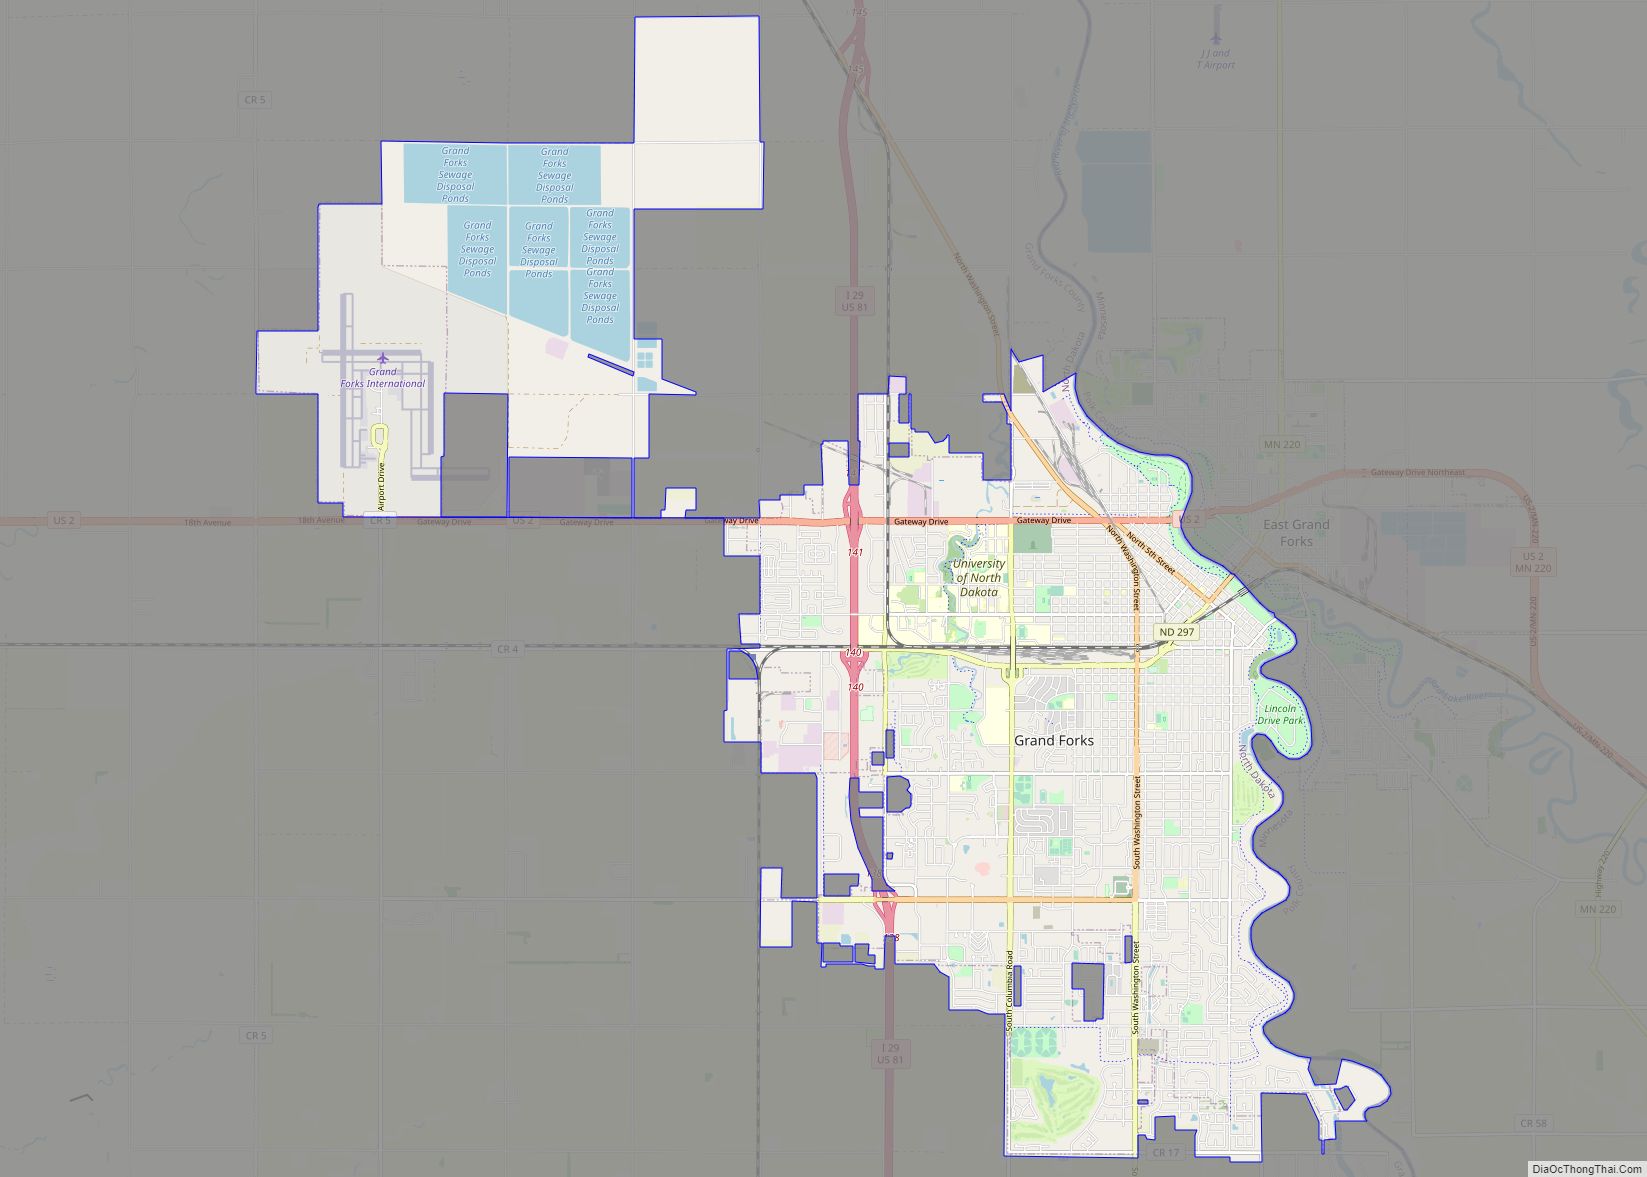 Map of Grand Forks city